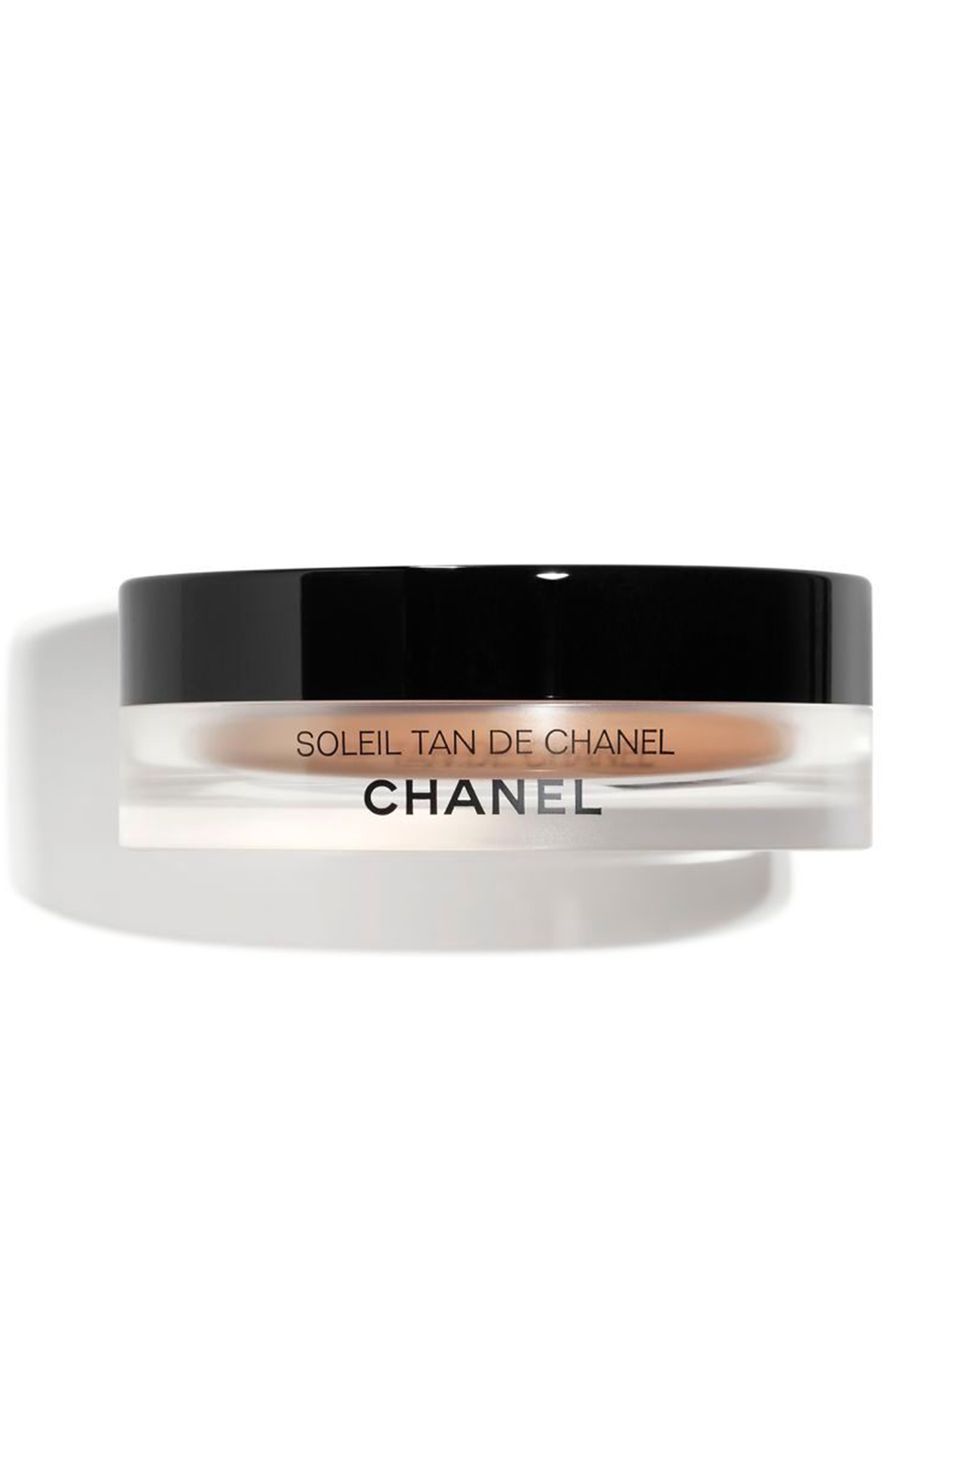 Chanel beauty products 